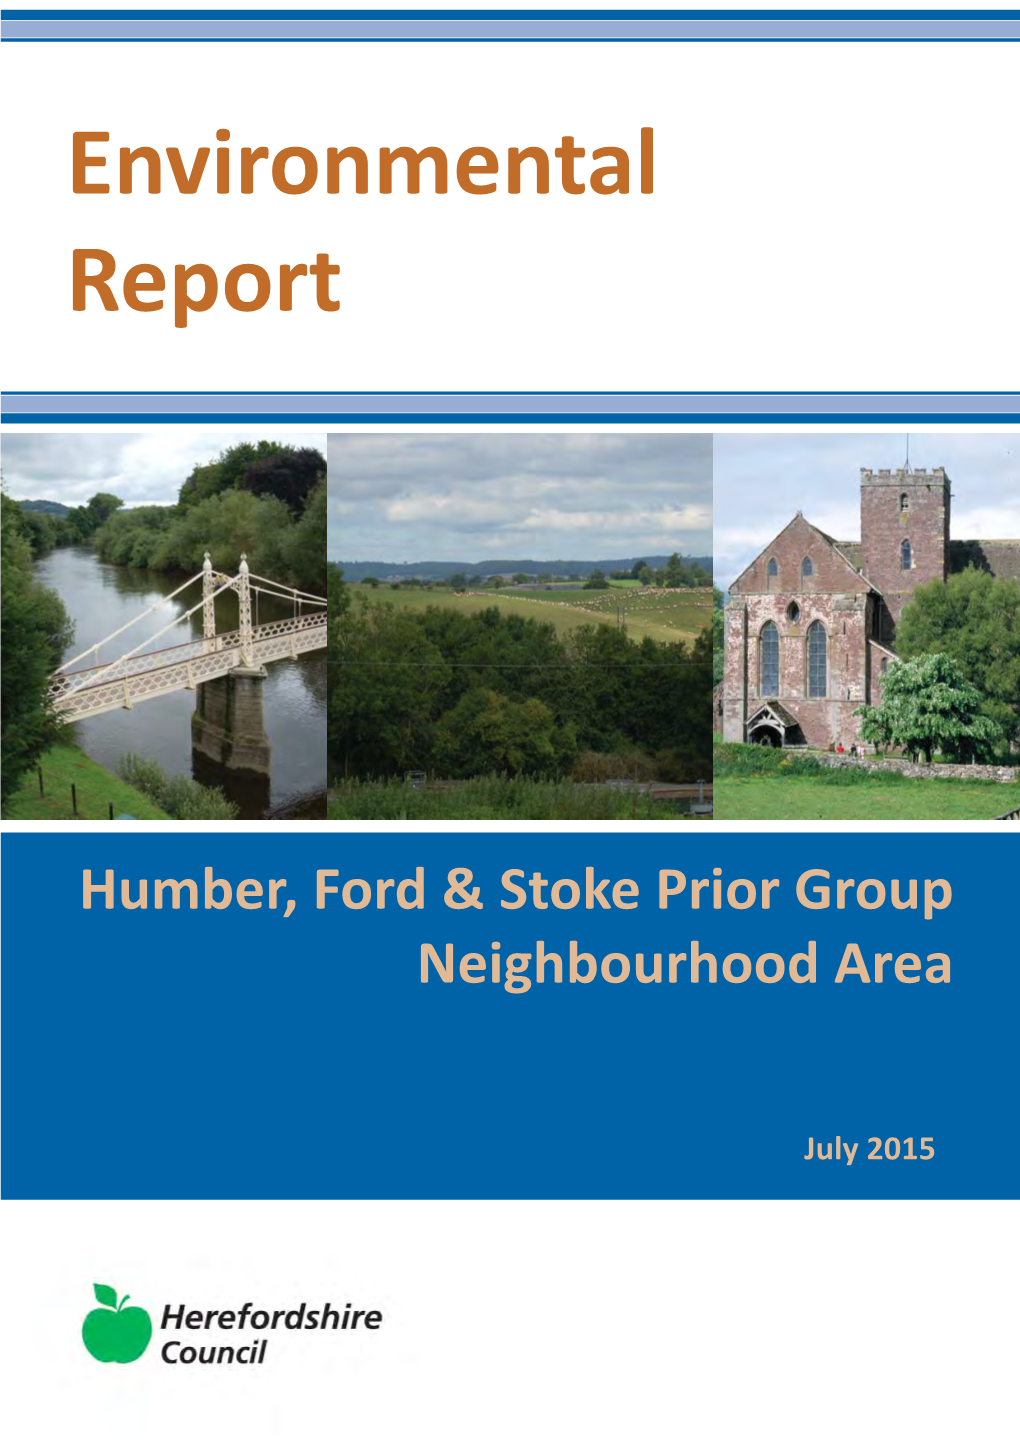 Humber, Ford, Stoke Prior Group Draft Environmental Report July 2015